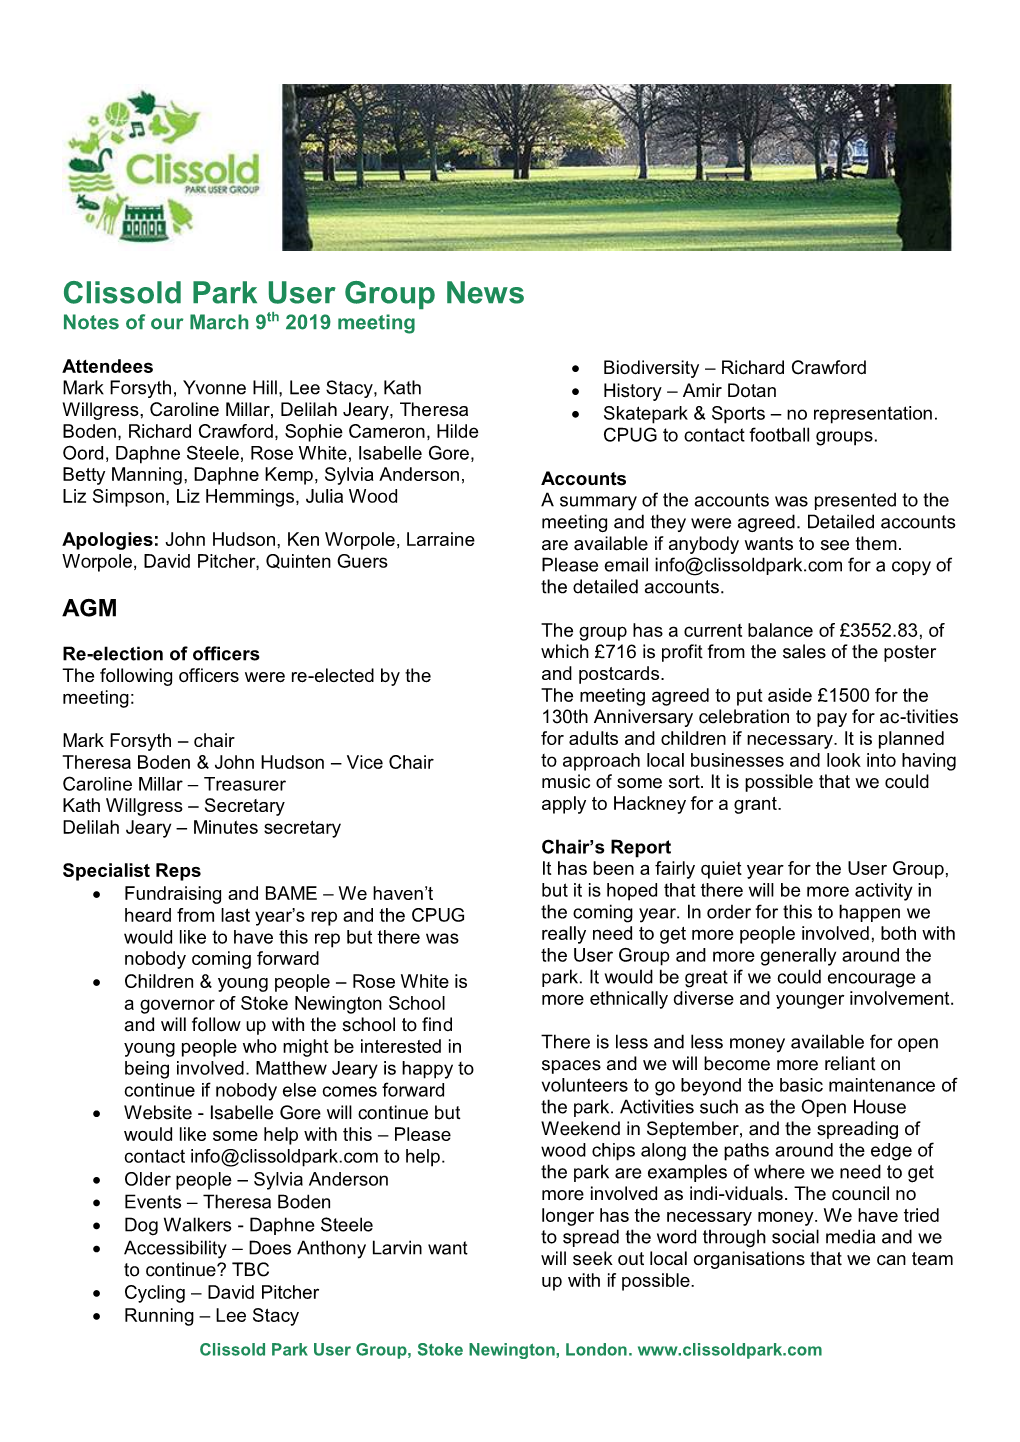 Clissold Park User Group News Notes of Our March 9Th 2019 Meeting